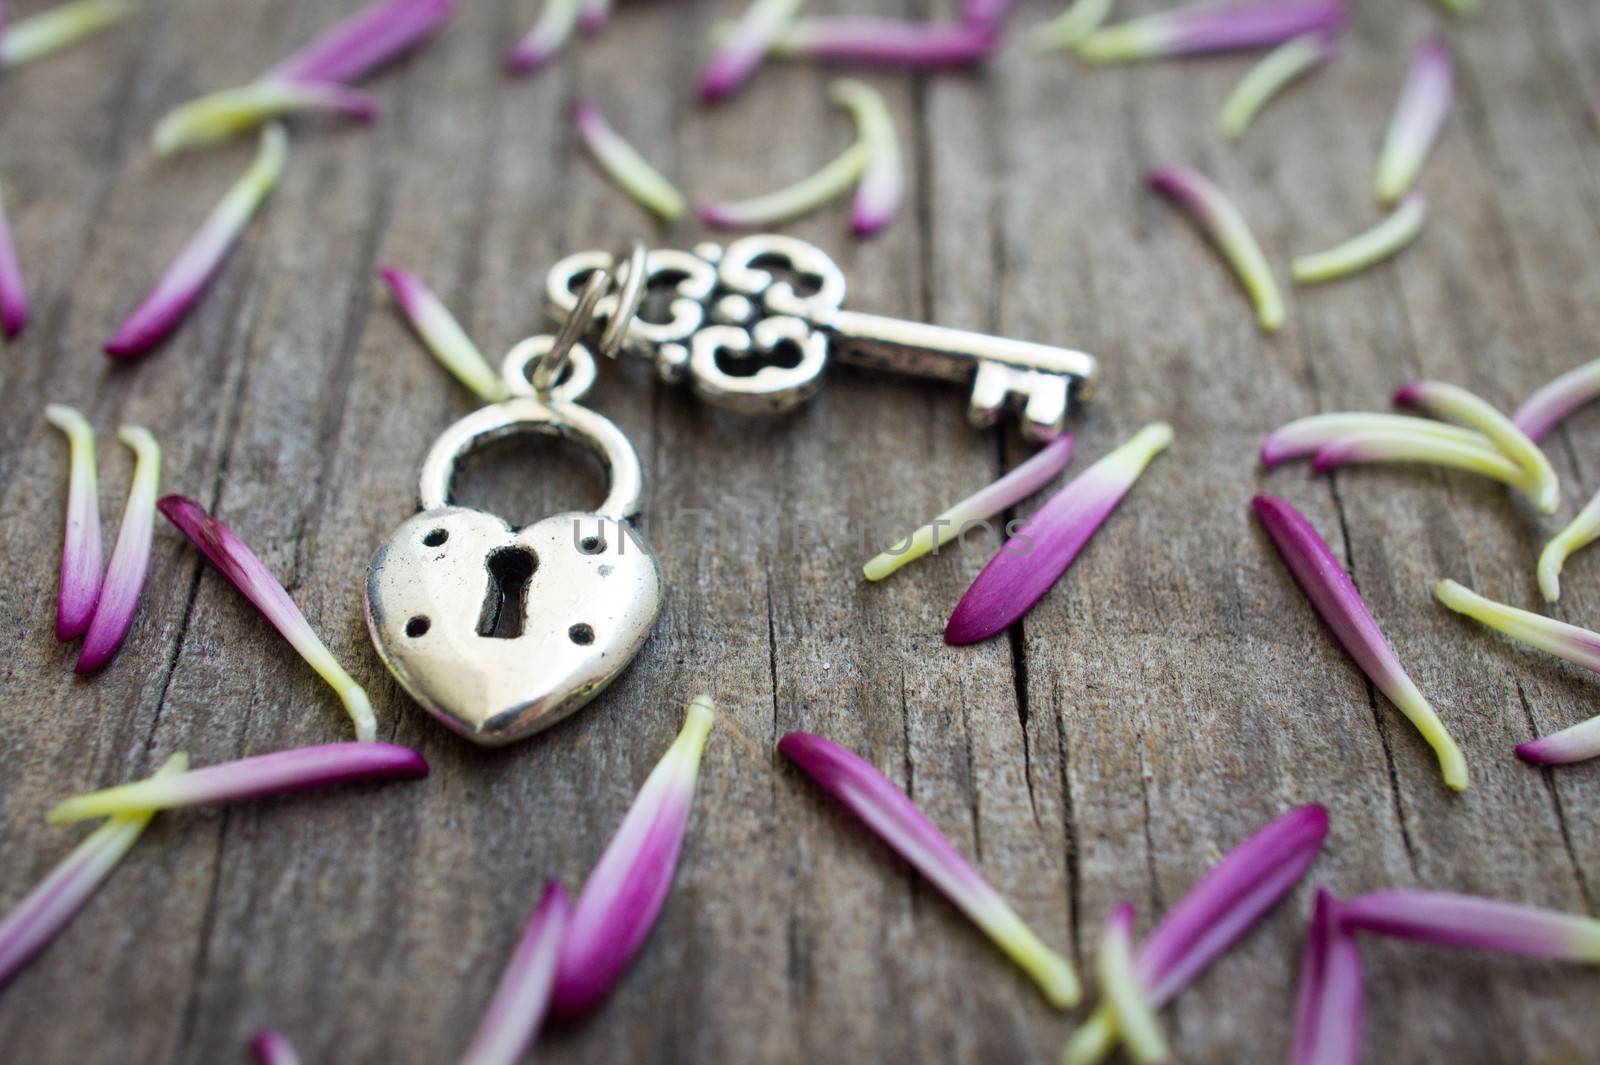 Key with heart shaped lock charm on wooden background.